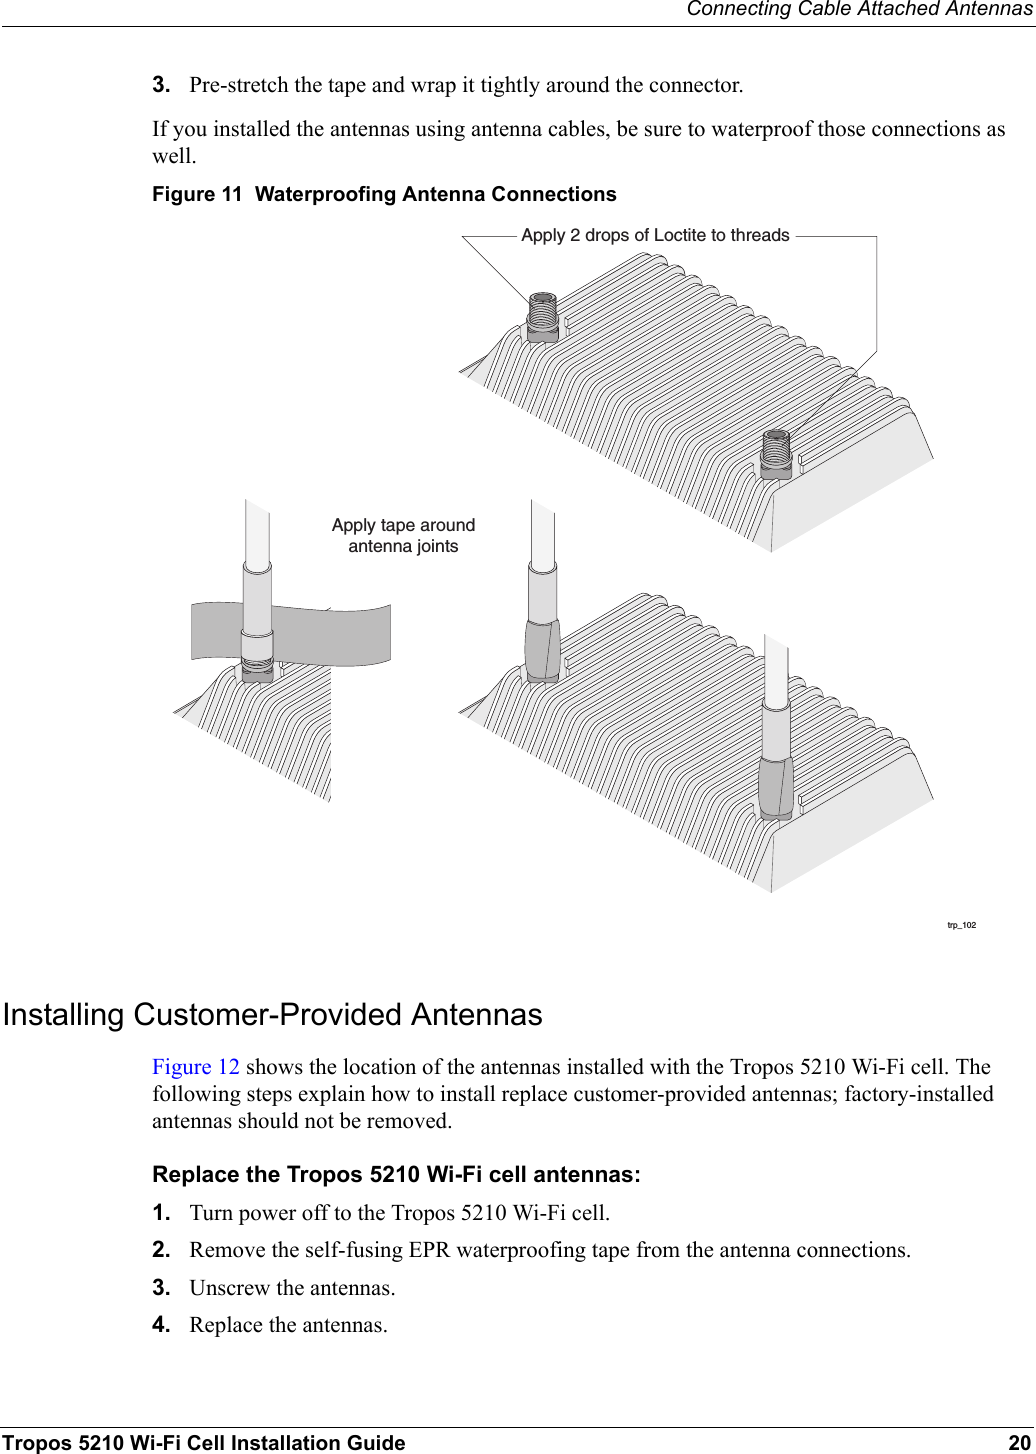 Connecting Cable Attached AntennasTropos 5210 Wi-Fi Cell Installation Guide 203. Pre-stretch the tape and wrap it tightly around the connector.If you installed the antennas using antenna cables, be sure to waterproof those connections as well.Figure 11  Waterproofing Antenna ConnectionsInstalling Customer-Provided AntennasFigure 12 shows the location of the antennas installed with the Tropos 5210 Wi-Fi cell. The following steps explain how to install replace customer-provided antennas; factory-installed antennas should not be removed.Replace the Tropos 5210 Wi-Fi cell antennas:1. Turn power off to the Tropos 5210 Wi-Fi cell.2. Remove the self-fusing EPR waterproofing tape from the antenna connections.3. Unscrew the antennas.4. Replace the antennas.Apply 2 drops of Loctite to threadstrp_102Apply tape aroundantenna joints